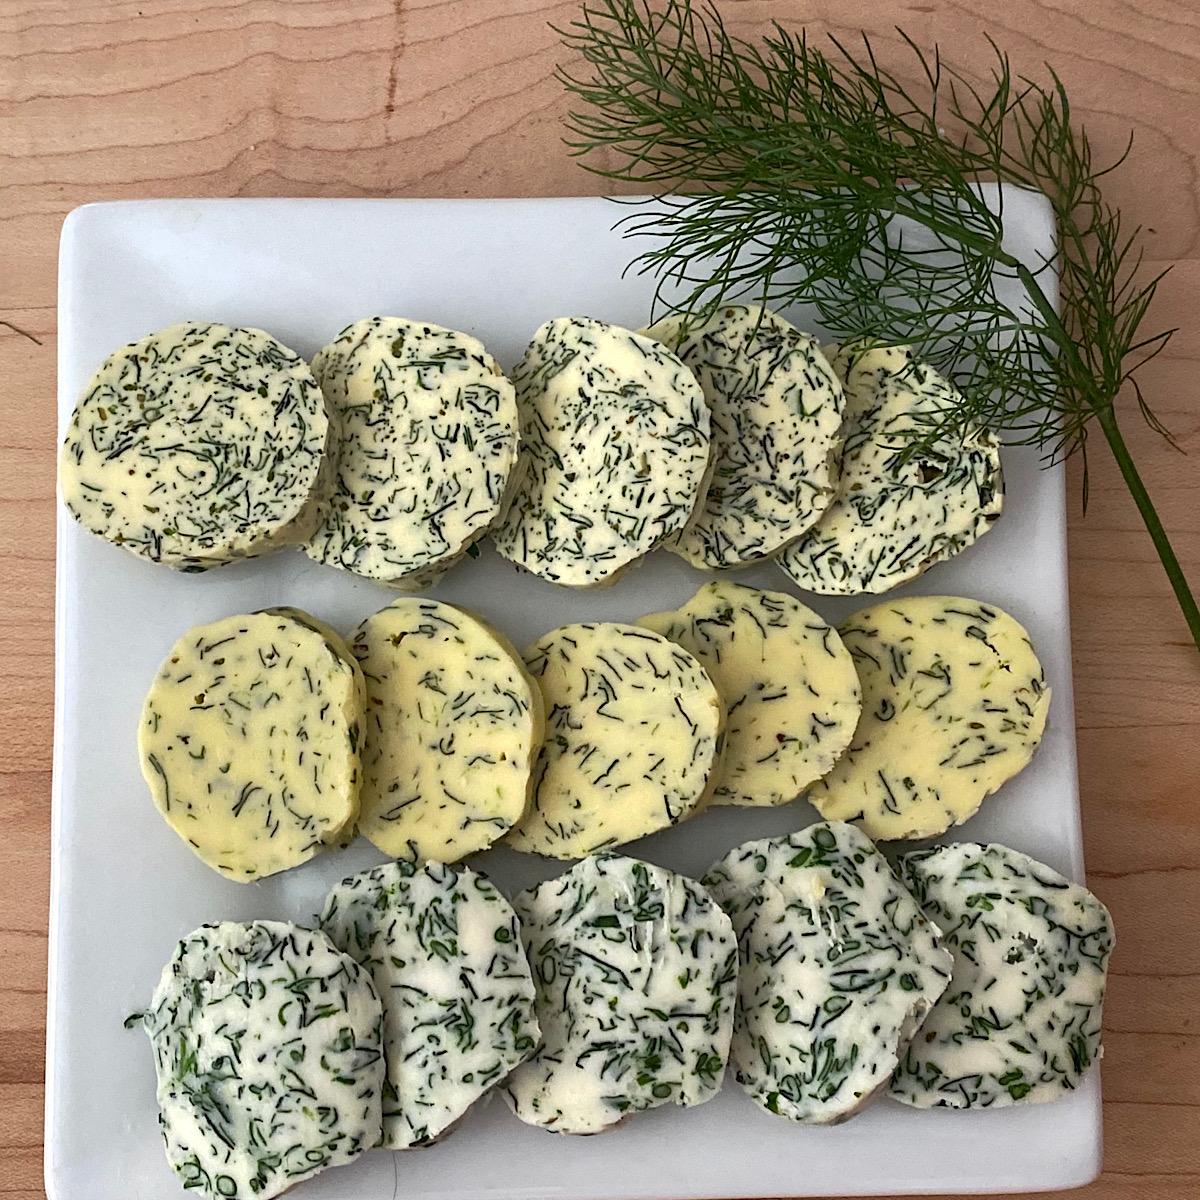 What Herbs Are In Herb Butter